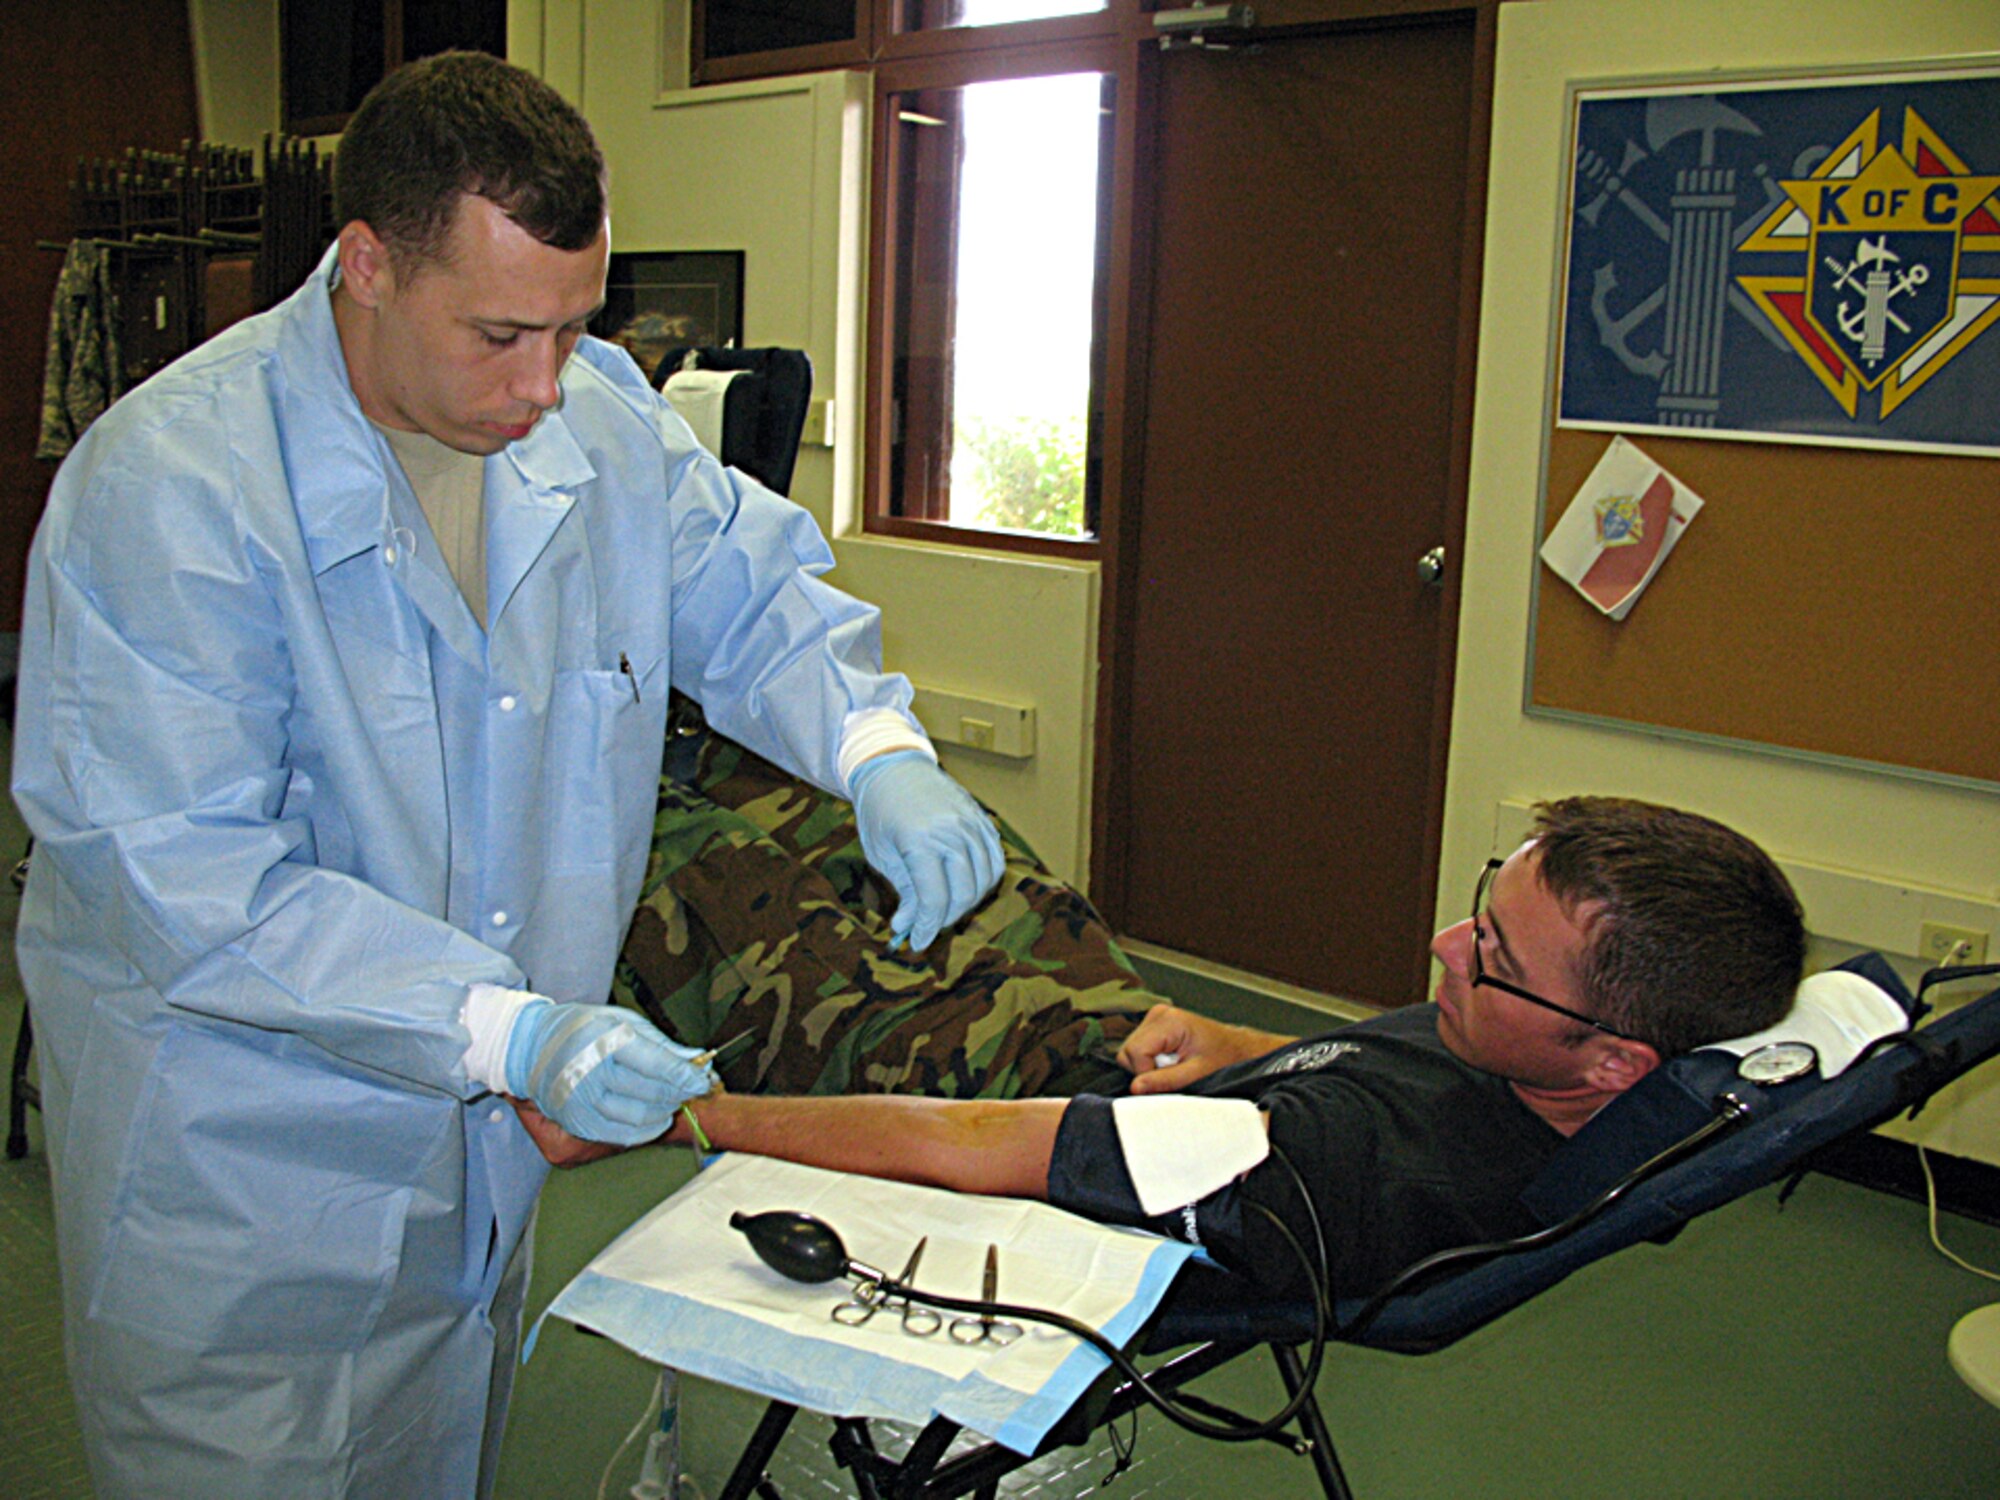 ANDERSEN AIR FORCE BASE, Guam -- Air Force Staff Sgt. David Bates, Armed Forces Blood Bank Center, prepares to draw blood from Staff Sgt. Chalmers, 36th Civil Engineer Squadron firefighter, during the blood drive at the Chapel One Annex March 3. The Armed Forces Blood Bank Center is a joint service operation, with all branches of the military in its program. (U.S. Air Force photo by Airman 1st Class Carissa Wolff)